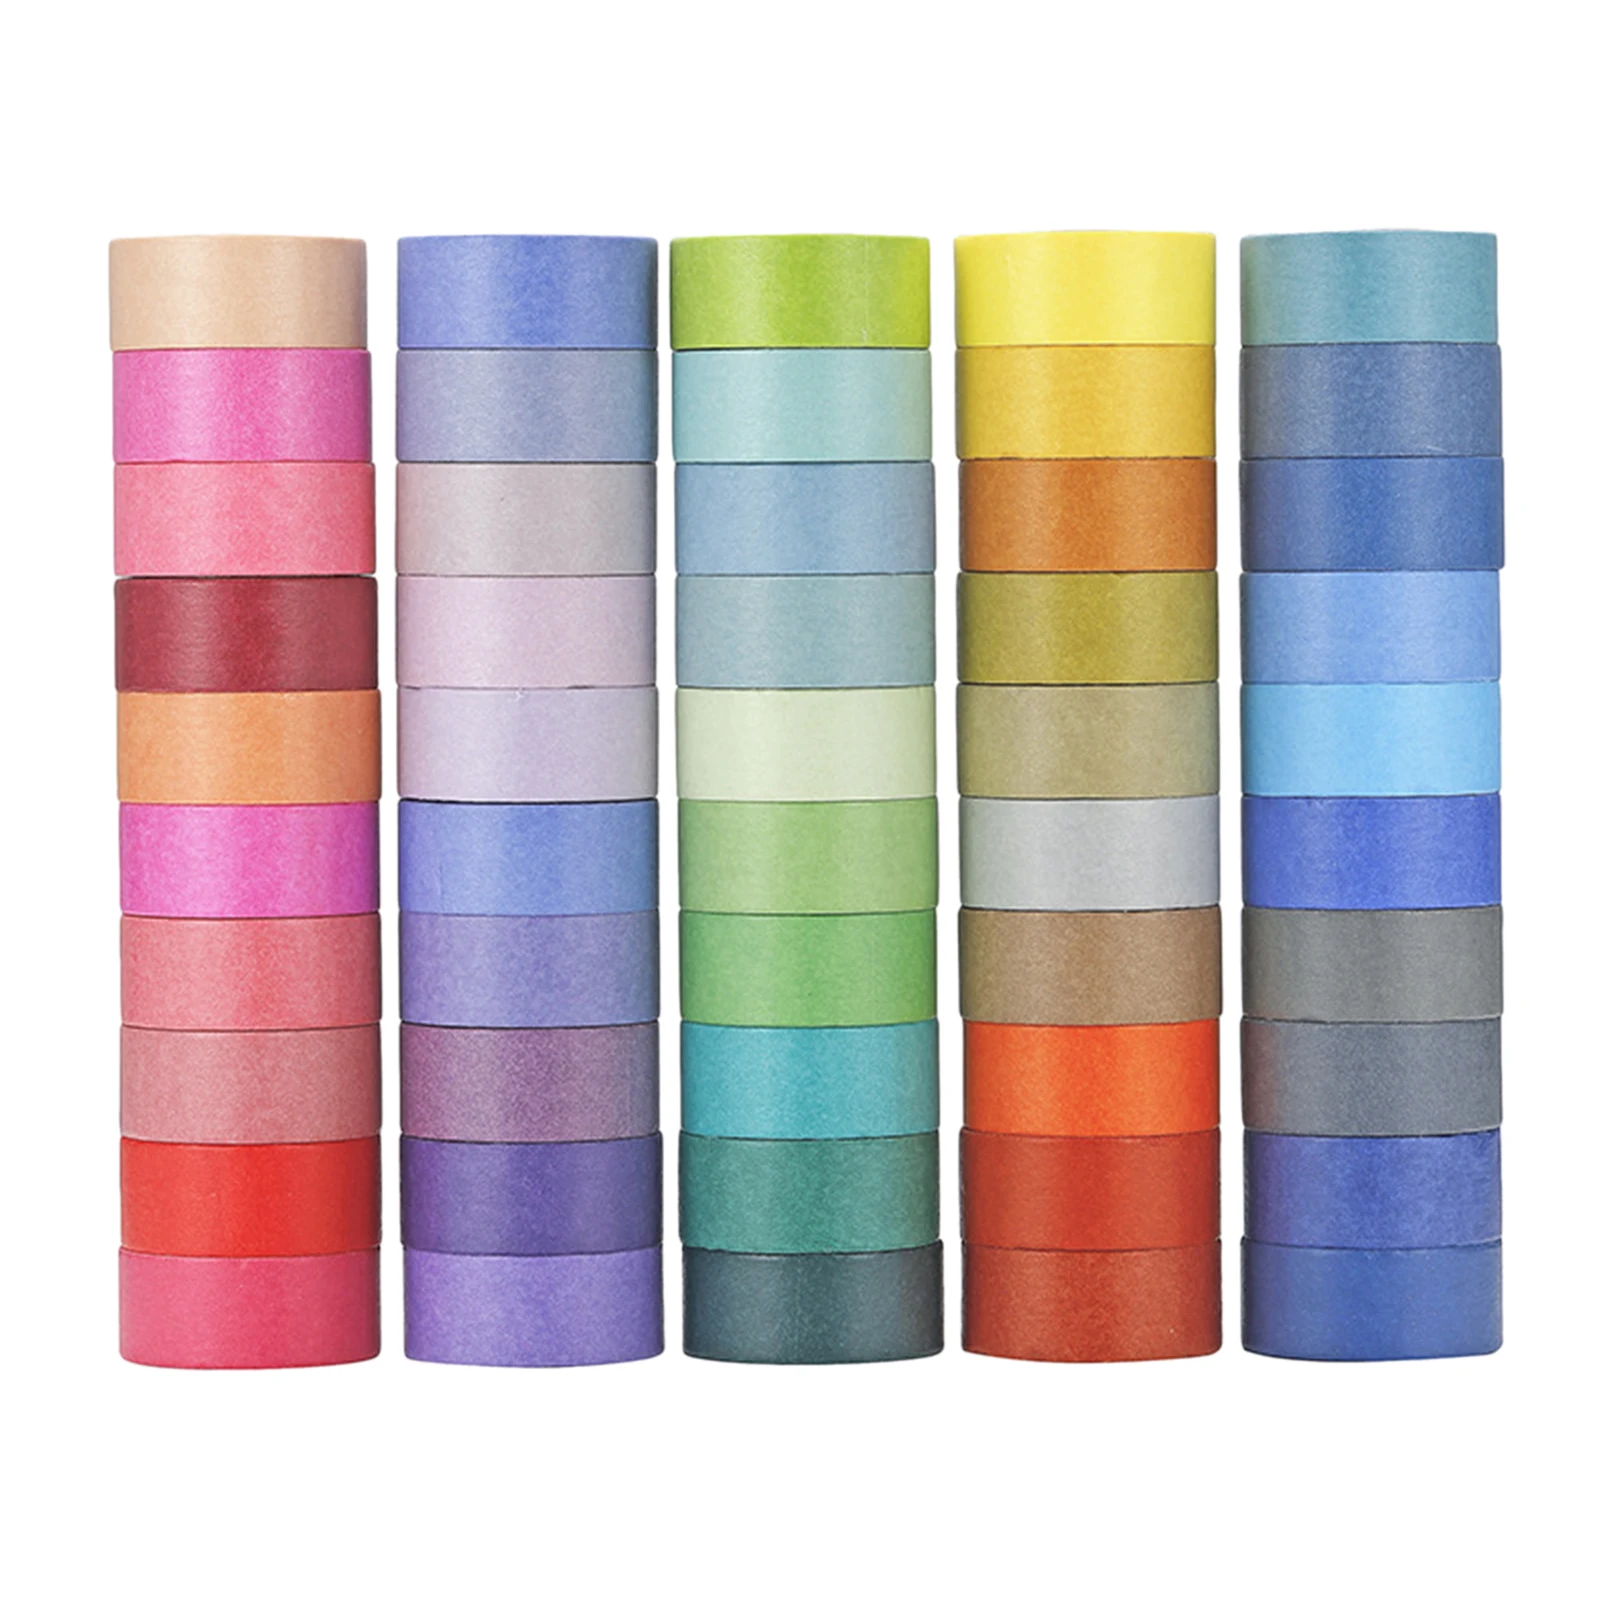 60 Rolls Washi Tape Set Rainbow Colored Masking Tapes Decorative Thin Tapes for Children and Gifts Warpping